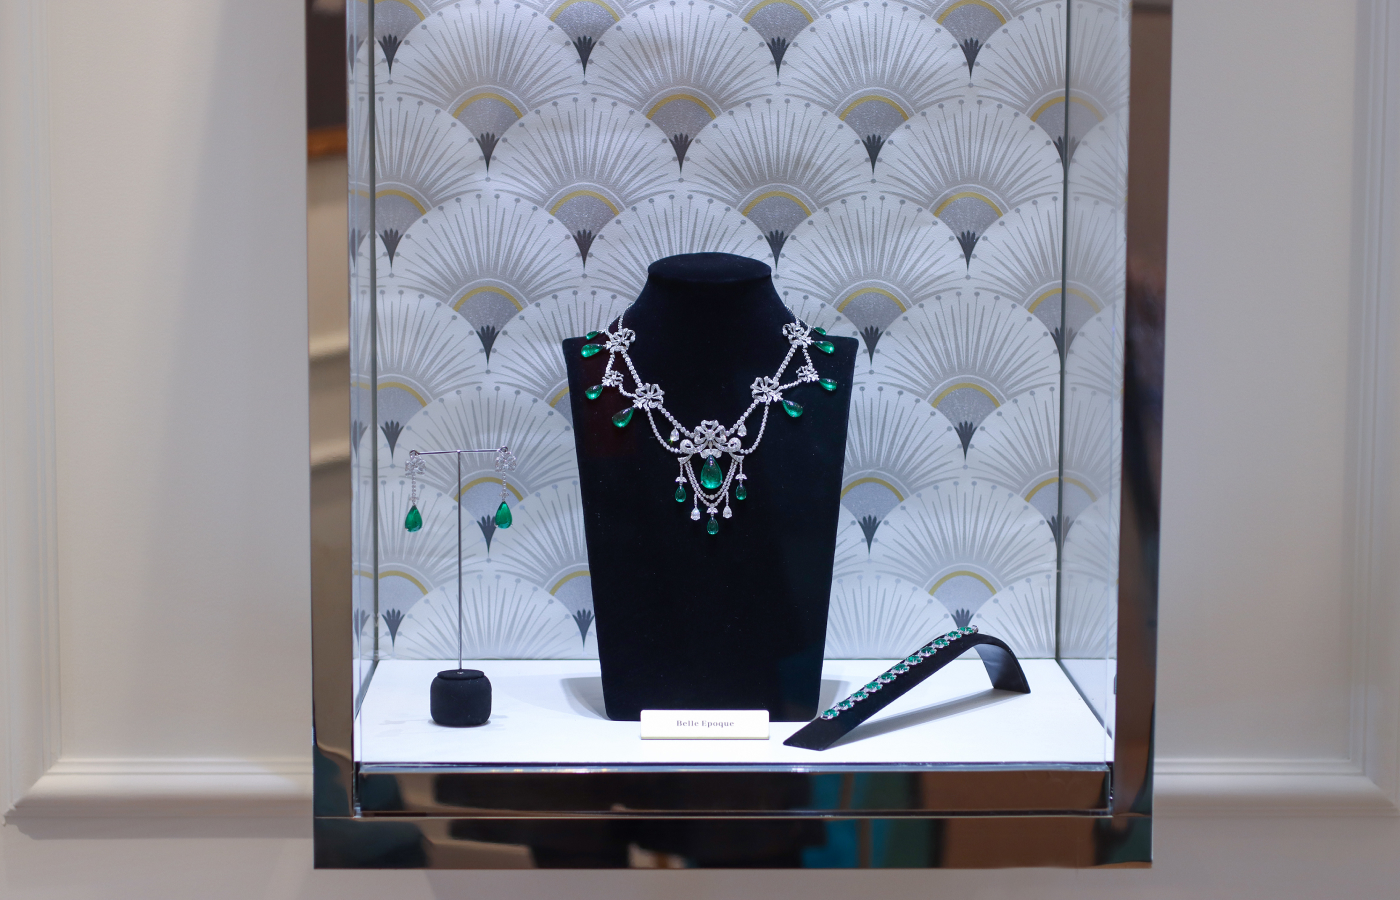 Serendipity Jewelry Belle Epoque High Jewellery suite, including a transformable necklace/brooch with 68 carats of pear-cut Colombian emeralds and 24 carats of diamonds, requiring nearly 1,000 hours of workmanship 